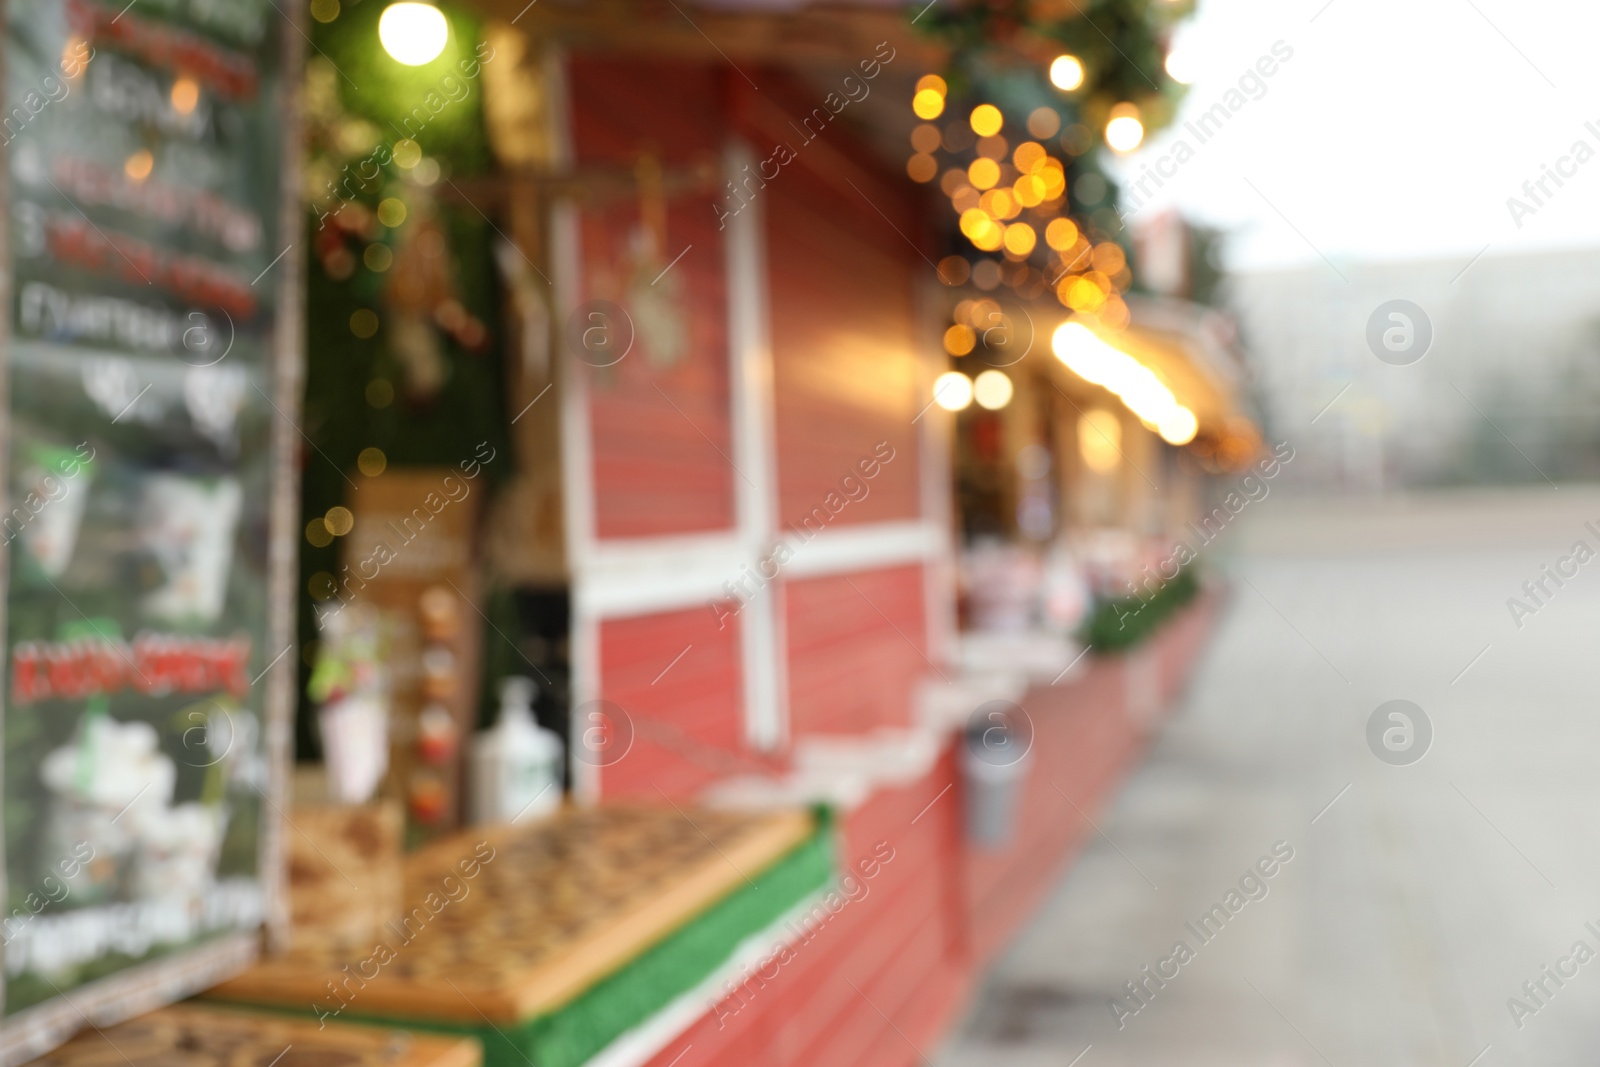 Photo of Blurred view of Christmas fair stalls outdoors